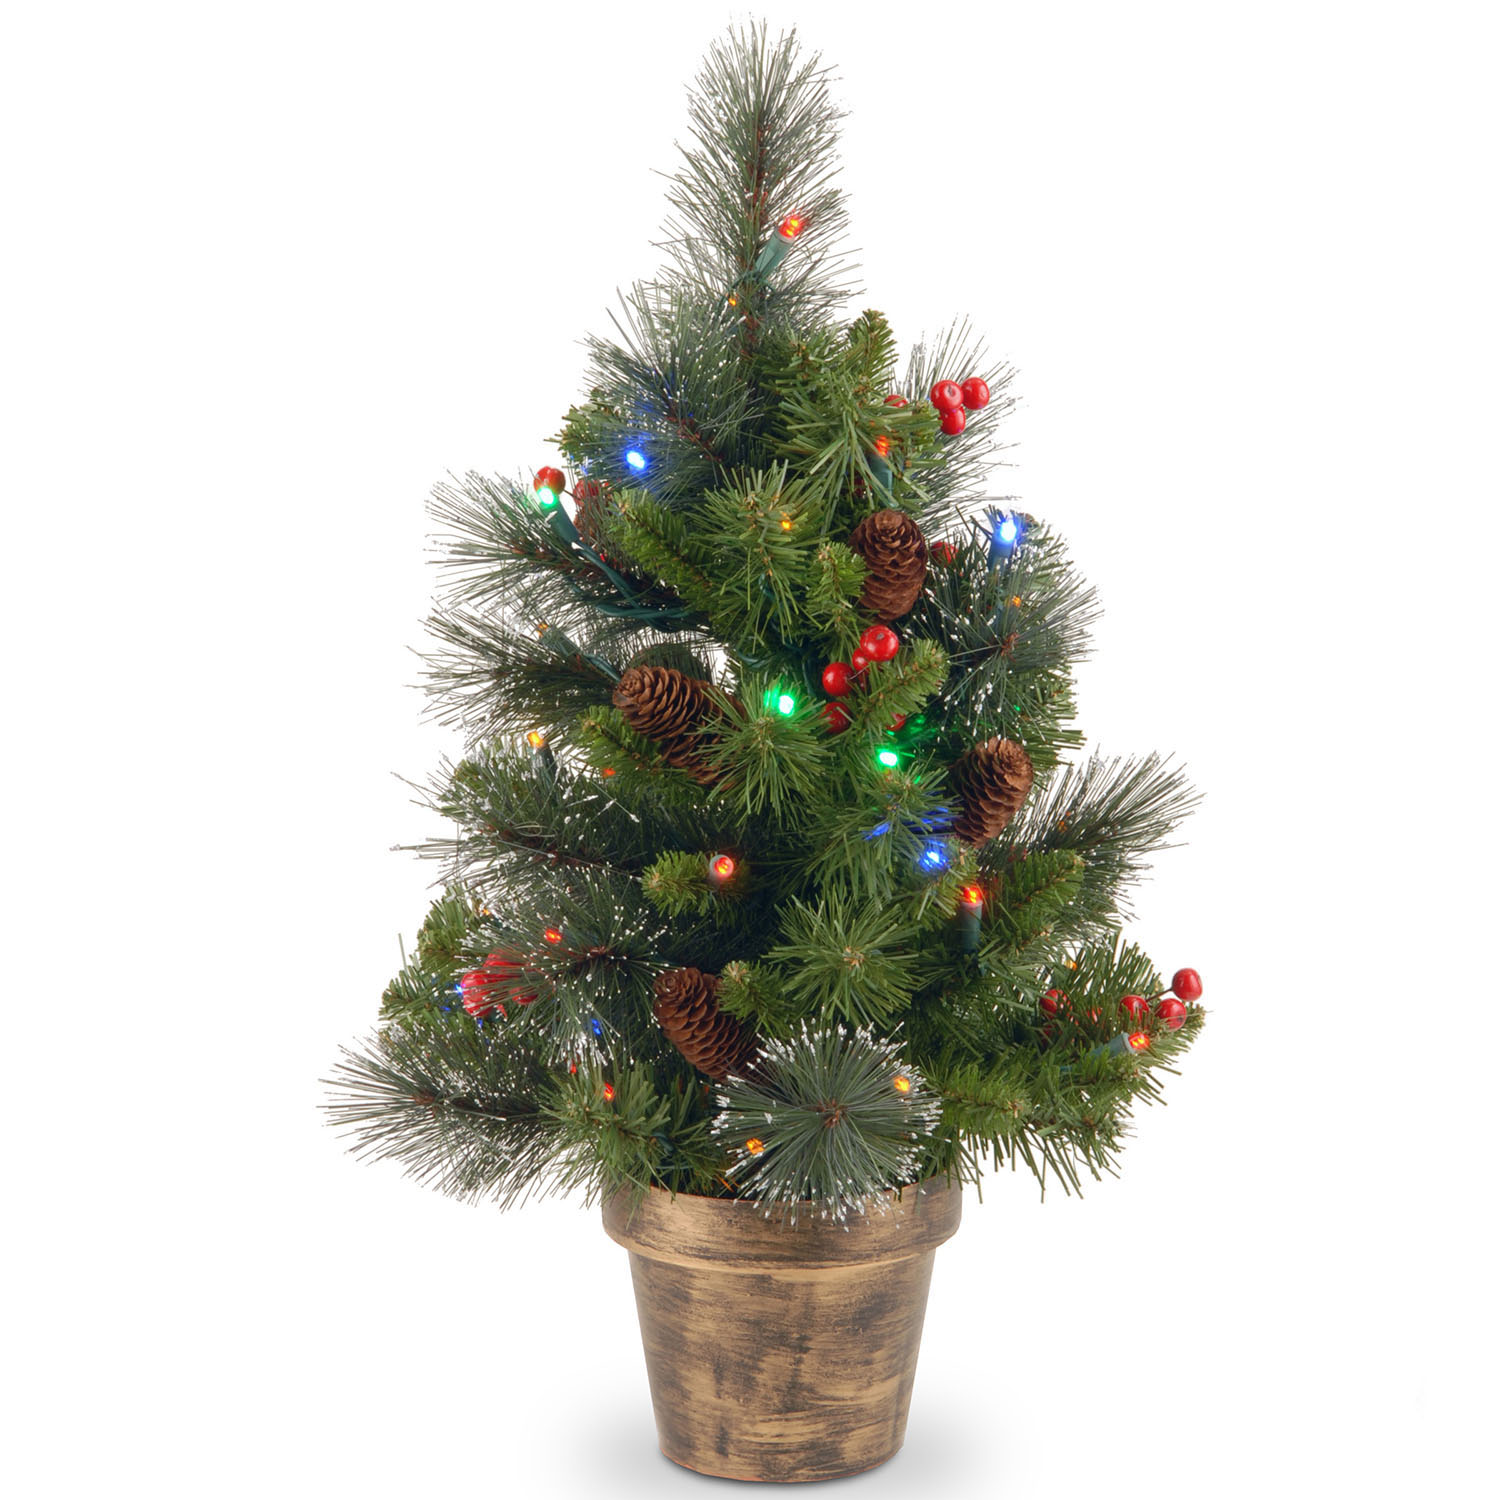 2 Foot Crestwood Spruce Small Tree: Planter/multi-colored Leds